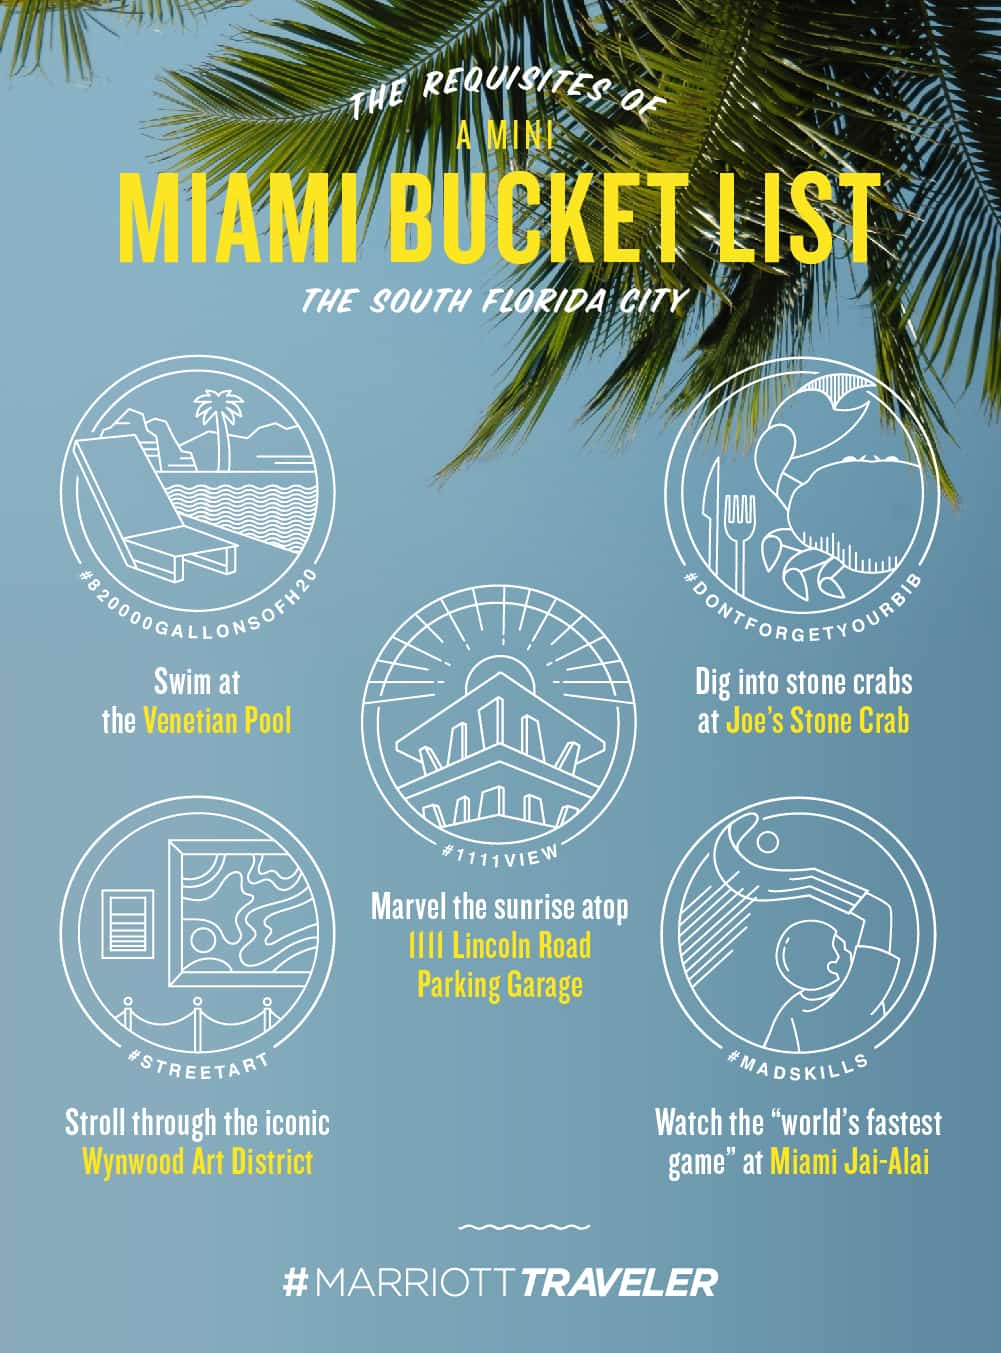 infographic example showing a mini miami bucket list